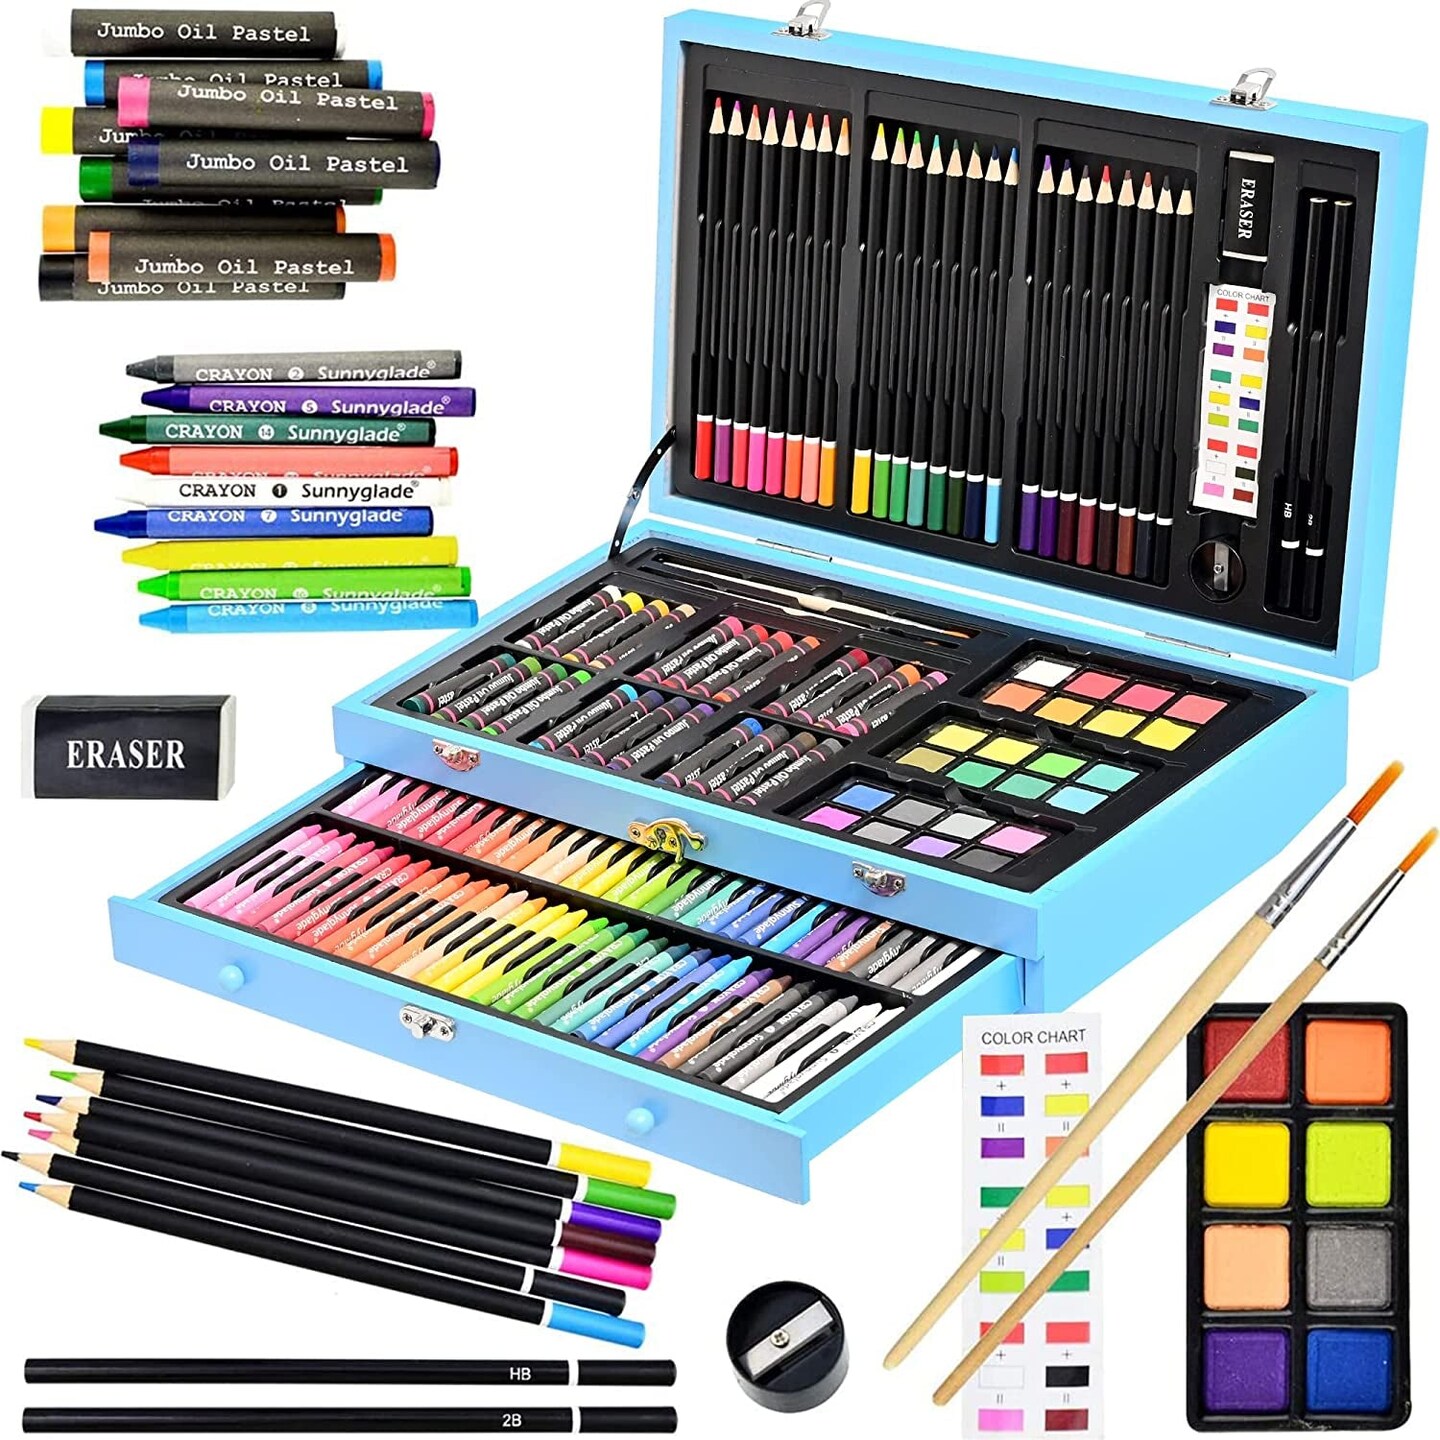 Artistik Deluxe Art Set - 141 Piece Professional Painting, Sketching & Drawing Art Set, with Wood Art Storage Box and Bonus A5 Sketchpad